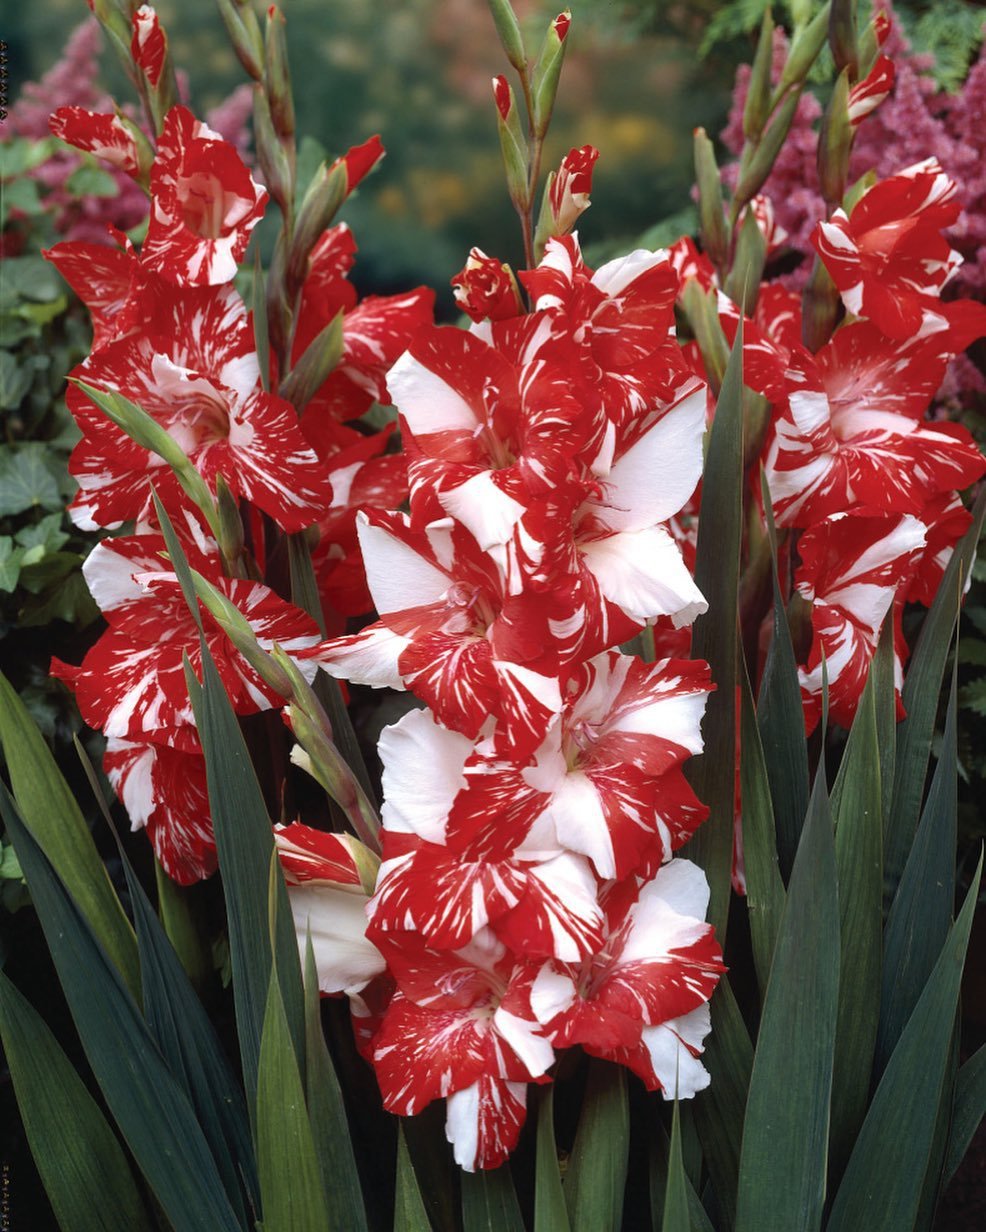 How To Grow And Care For Gladiolus